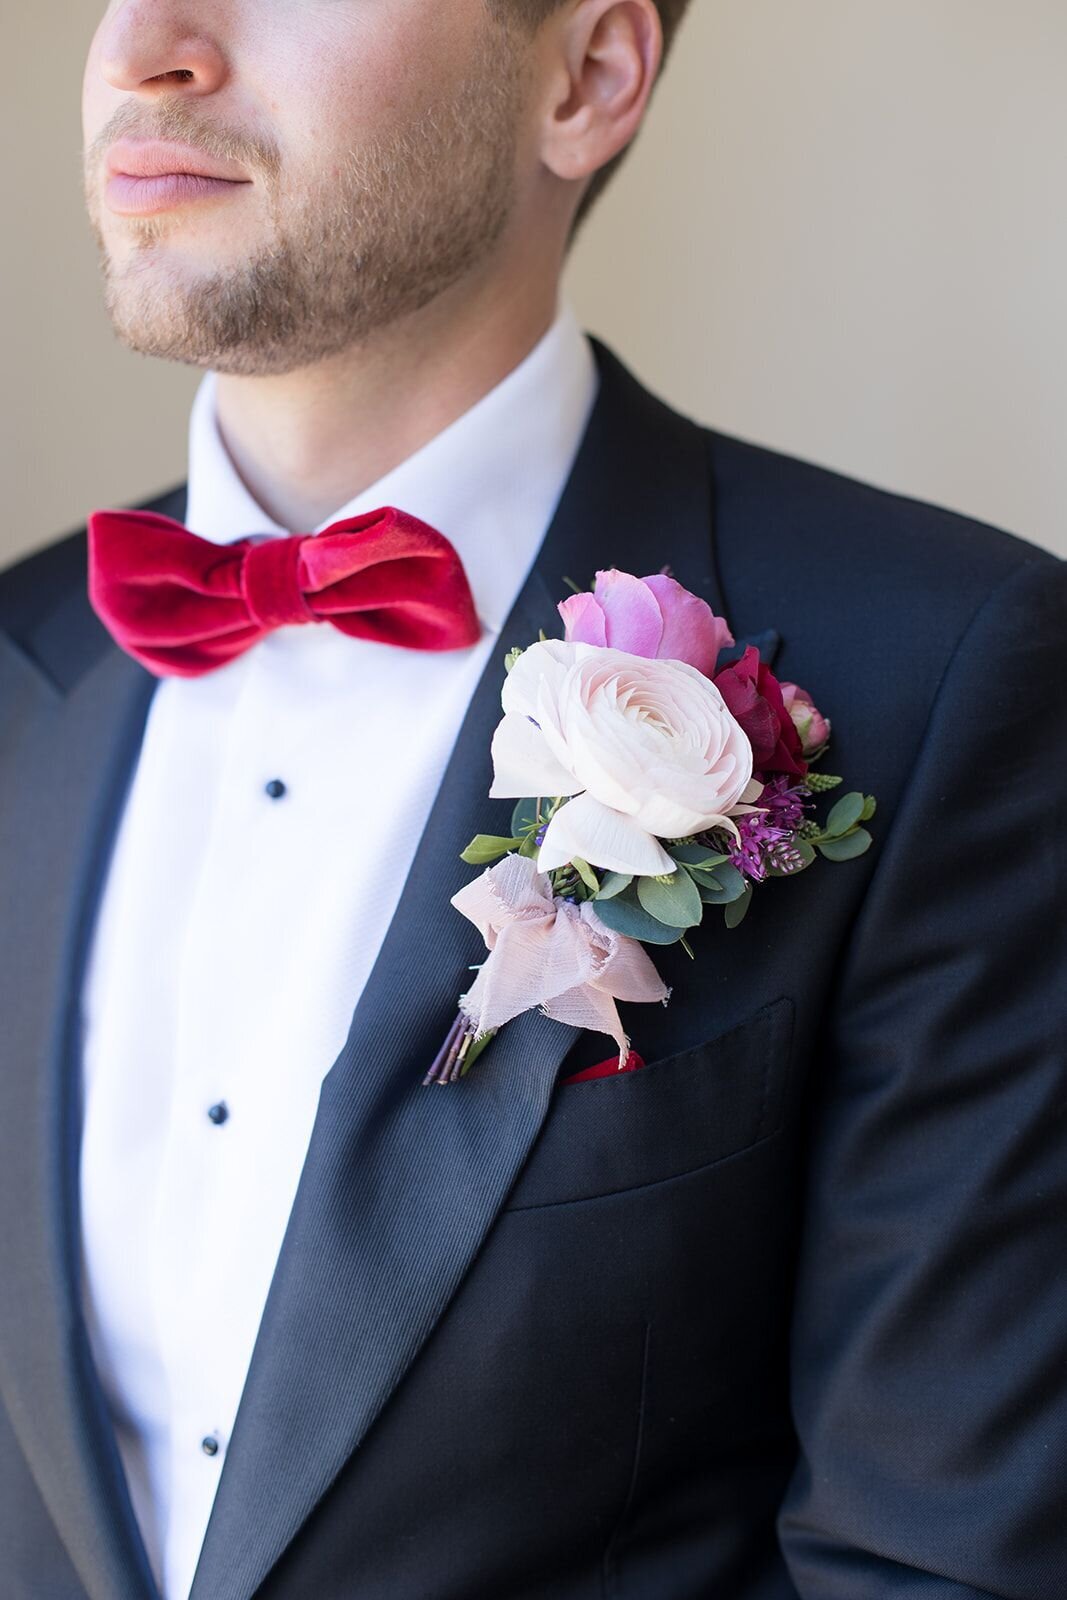 The groom has a full and bold boutonniere alongside his red velvet bowtie.